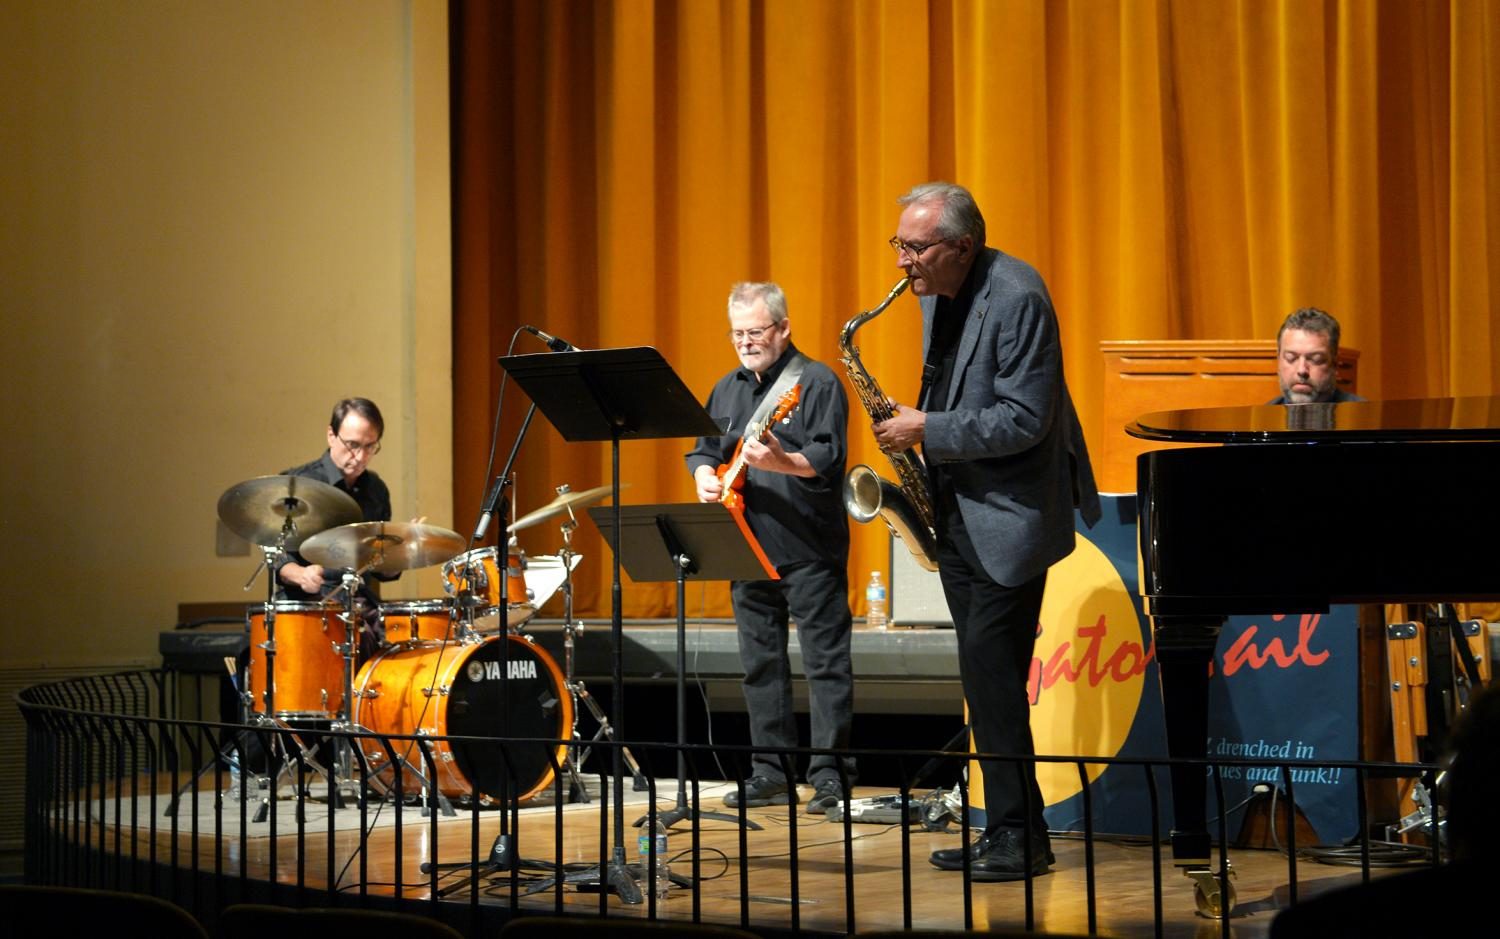 Members+of+the+WSU+School+of+Music+faculty+play+in+the+jazz+quartet%2C+Gator+Tail%2C+during+an+artist+series+on+Tuesday+at+Kimbrough+Concert+Hall.